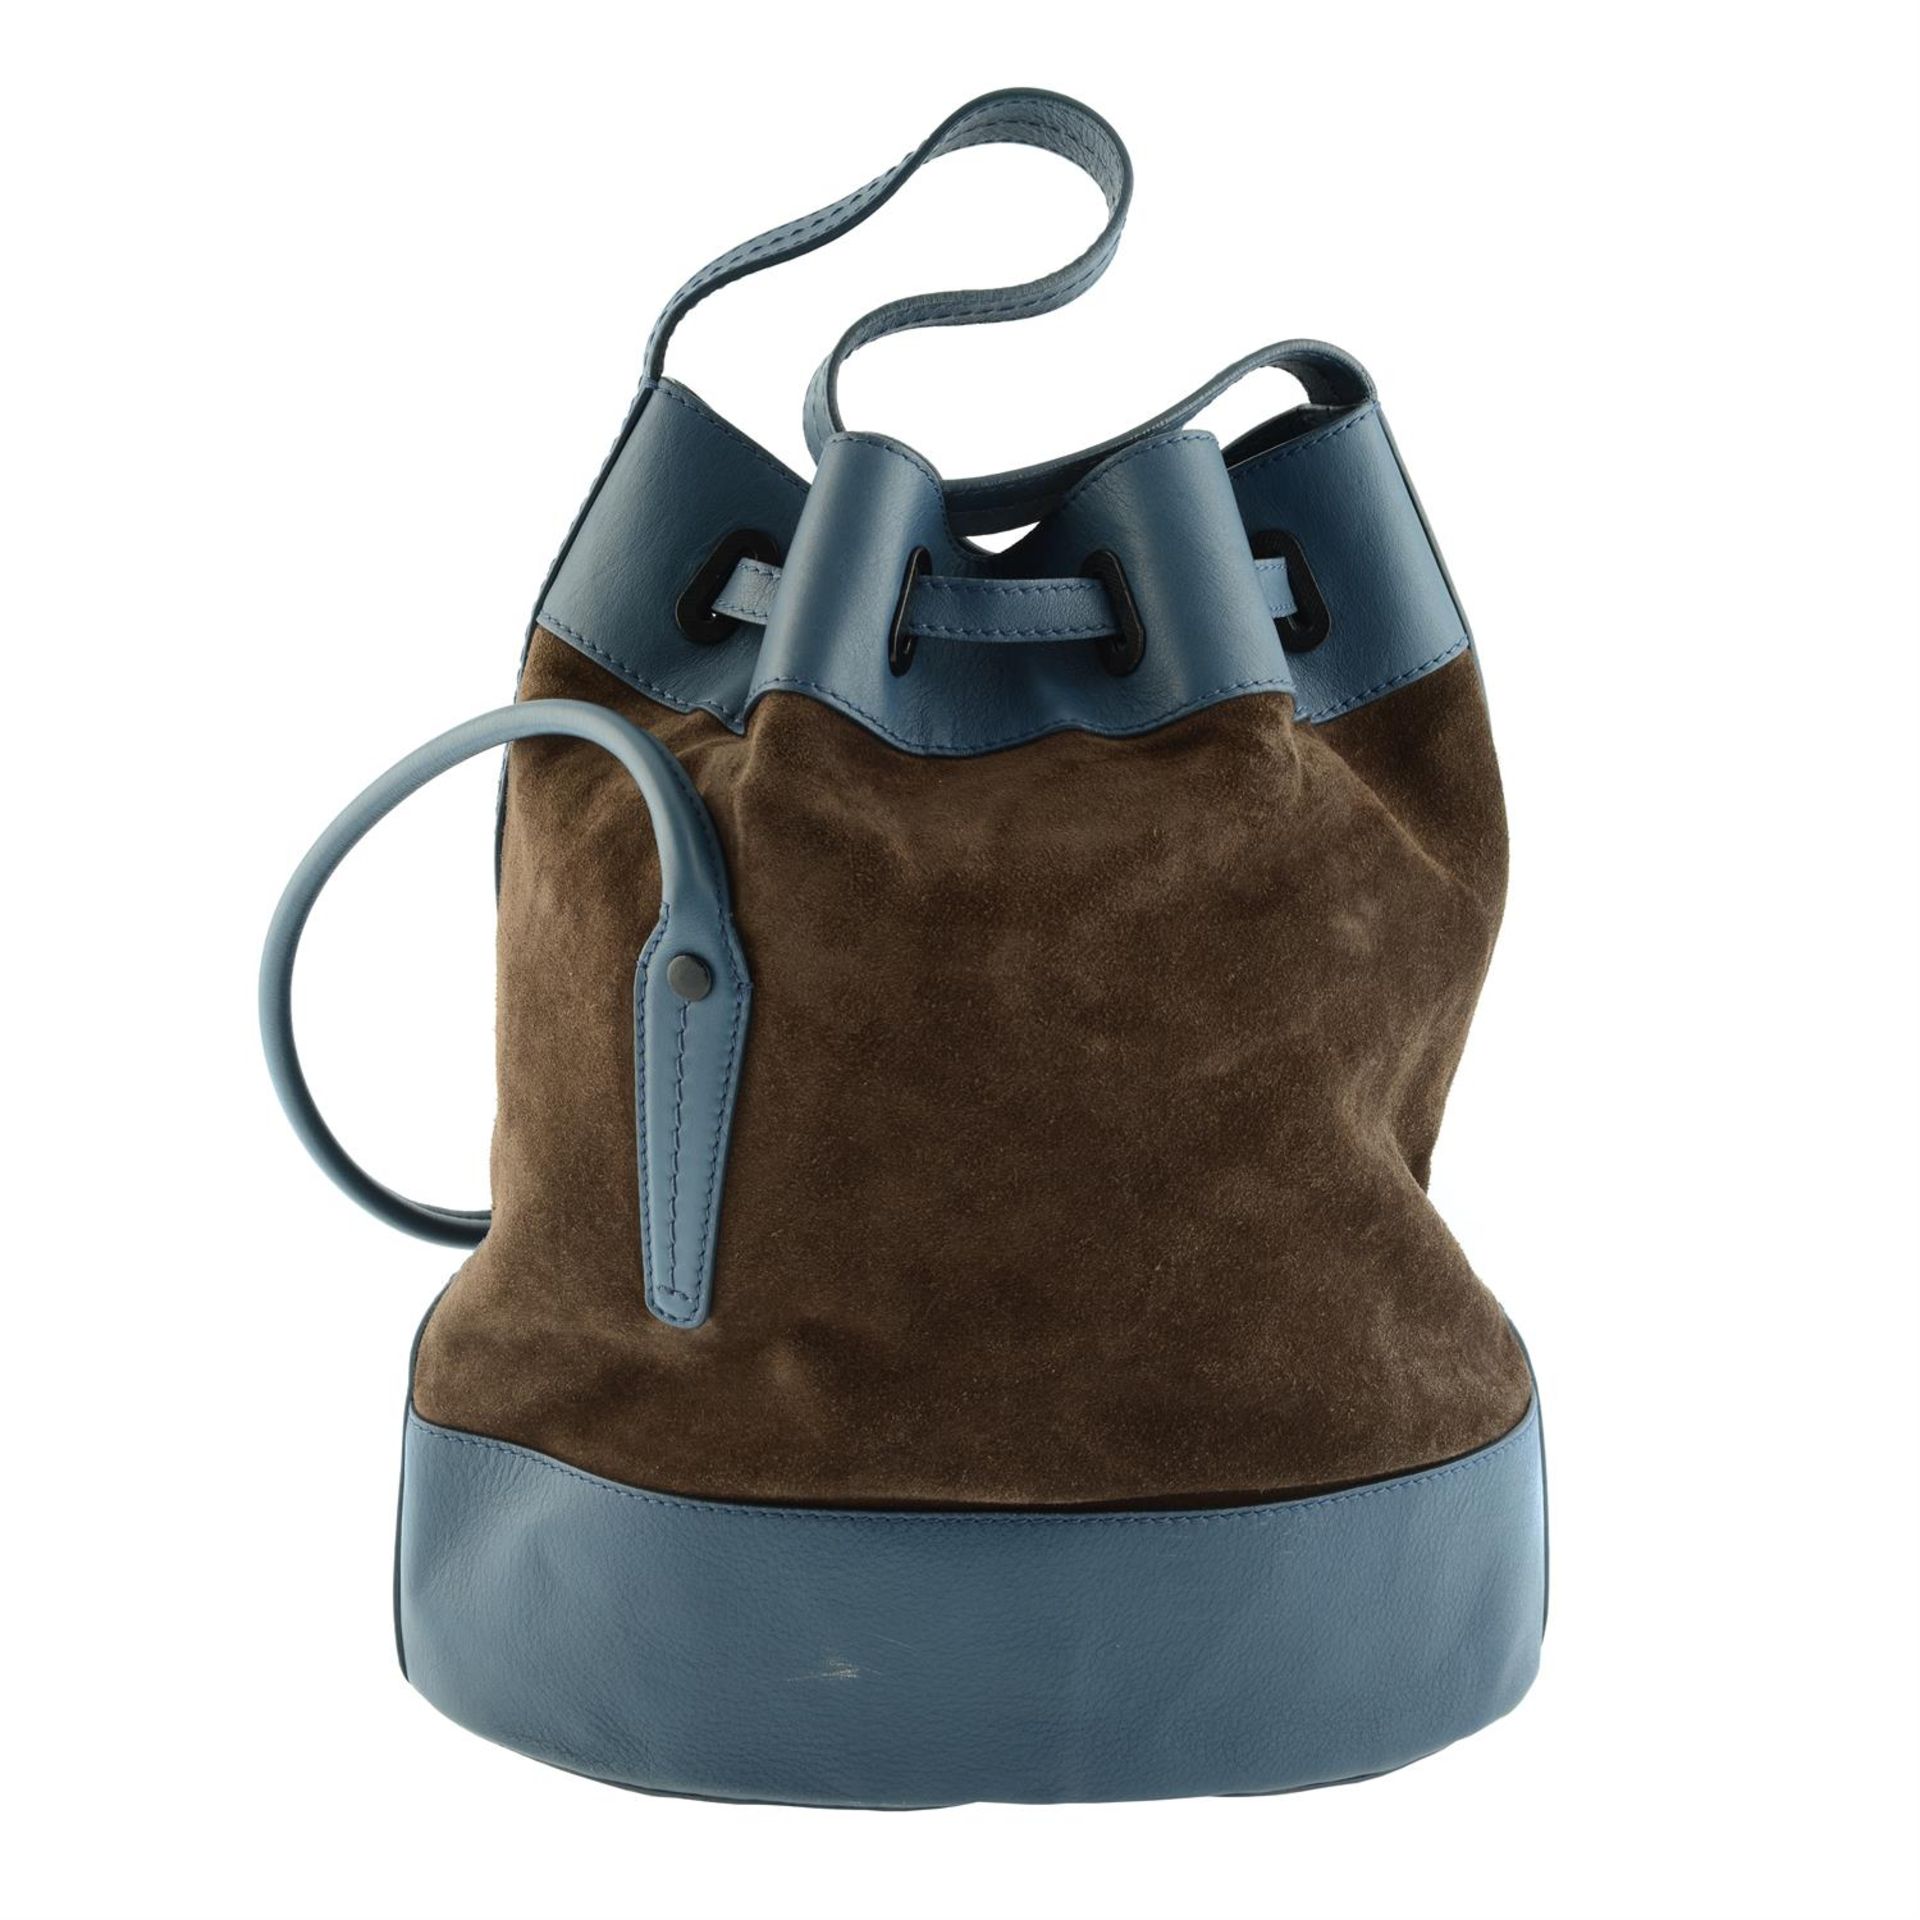 BALLY - a suede and leather bucket bag. - Image 3 of 5